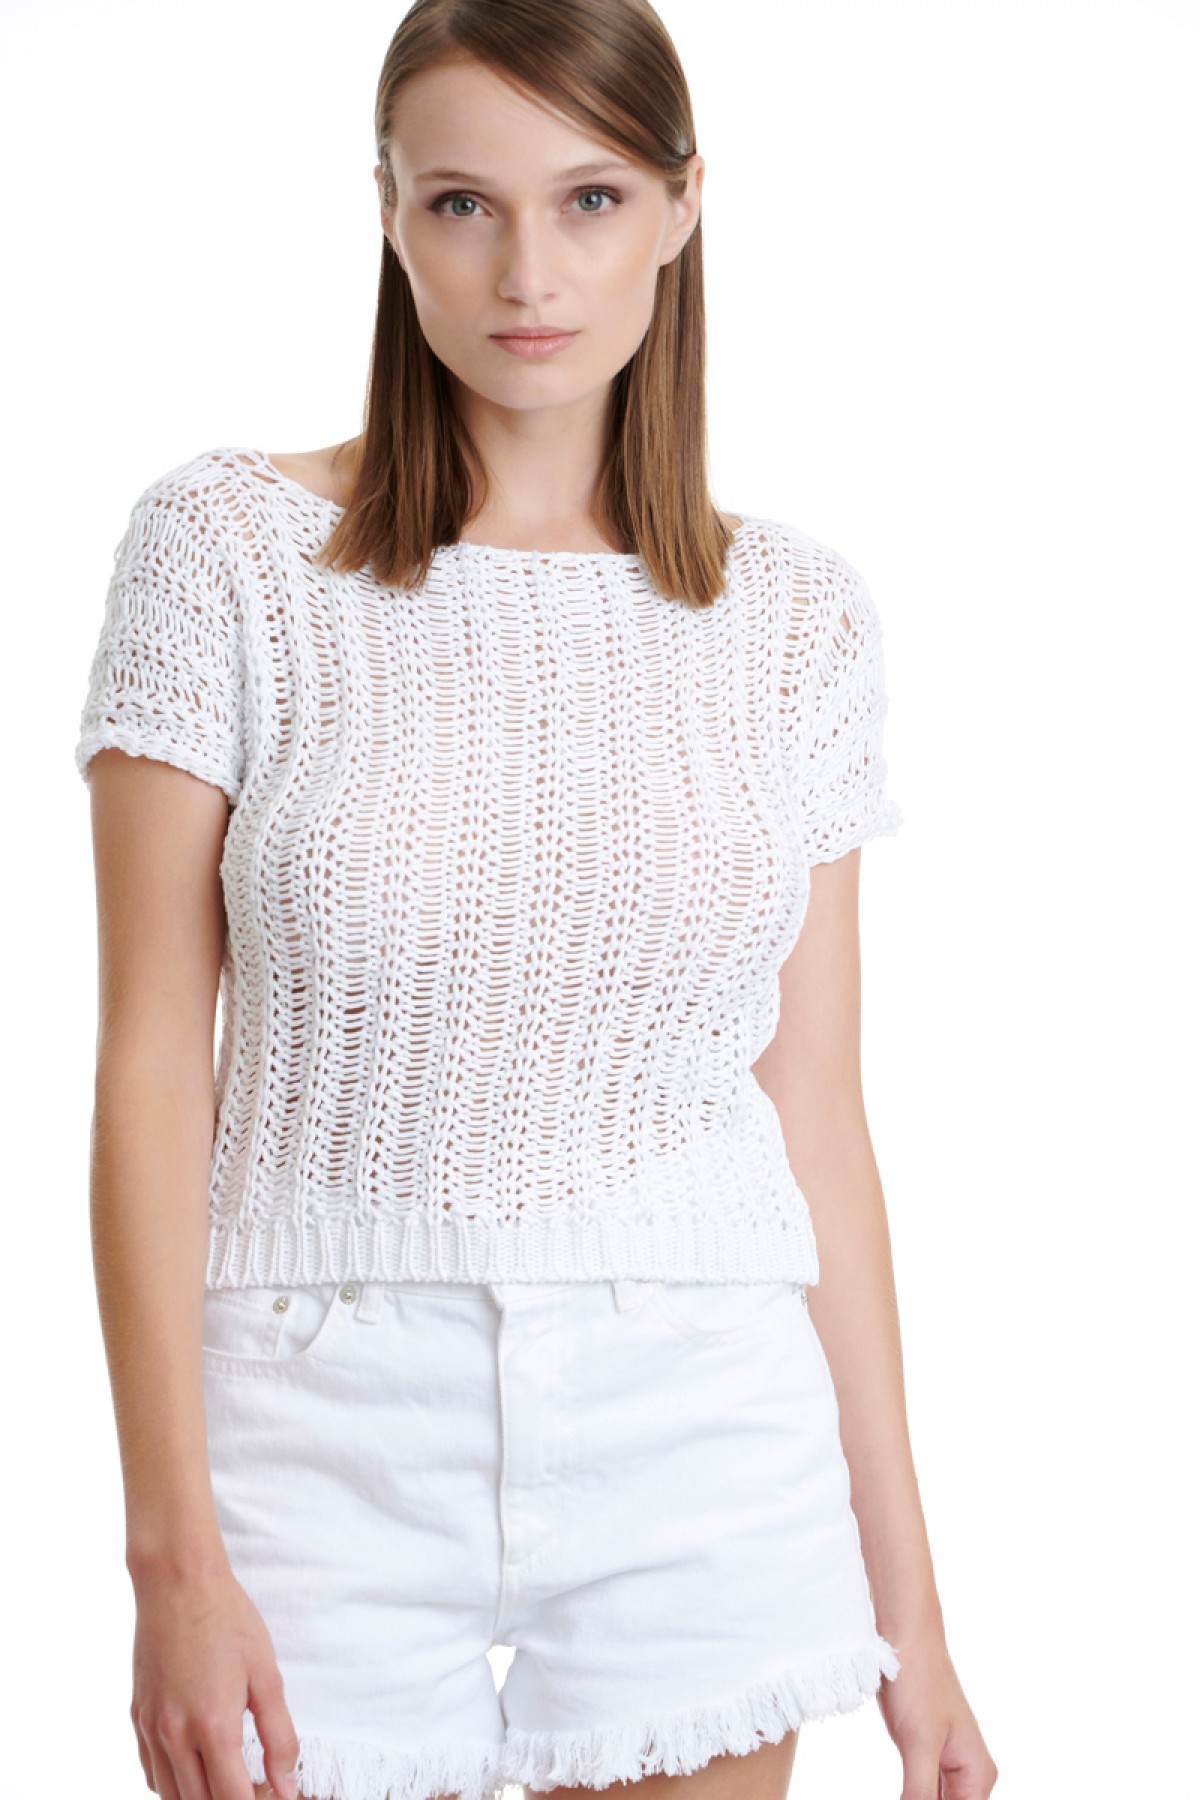 WHITE KNITTED TOP